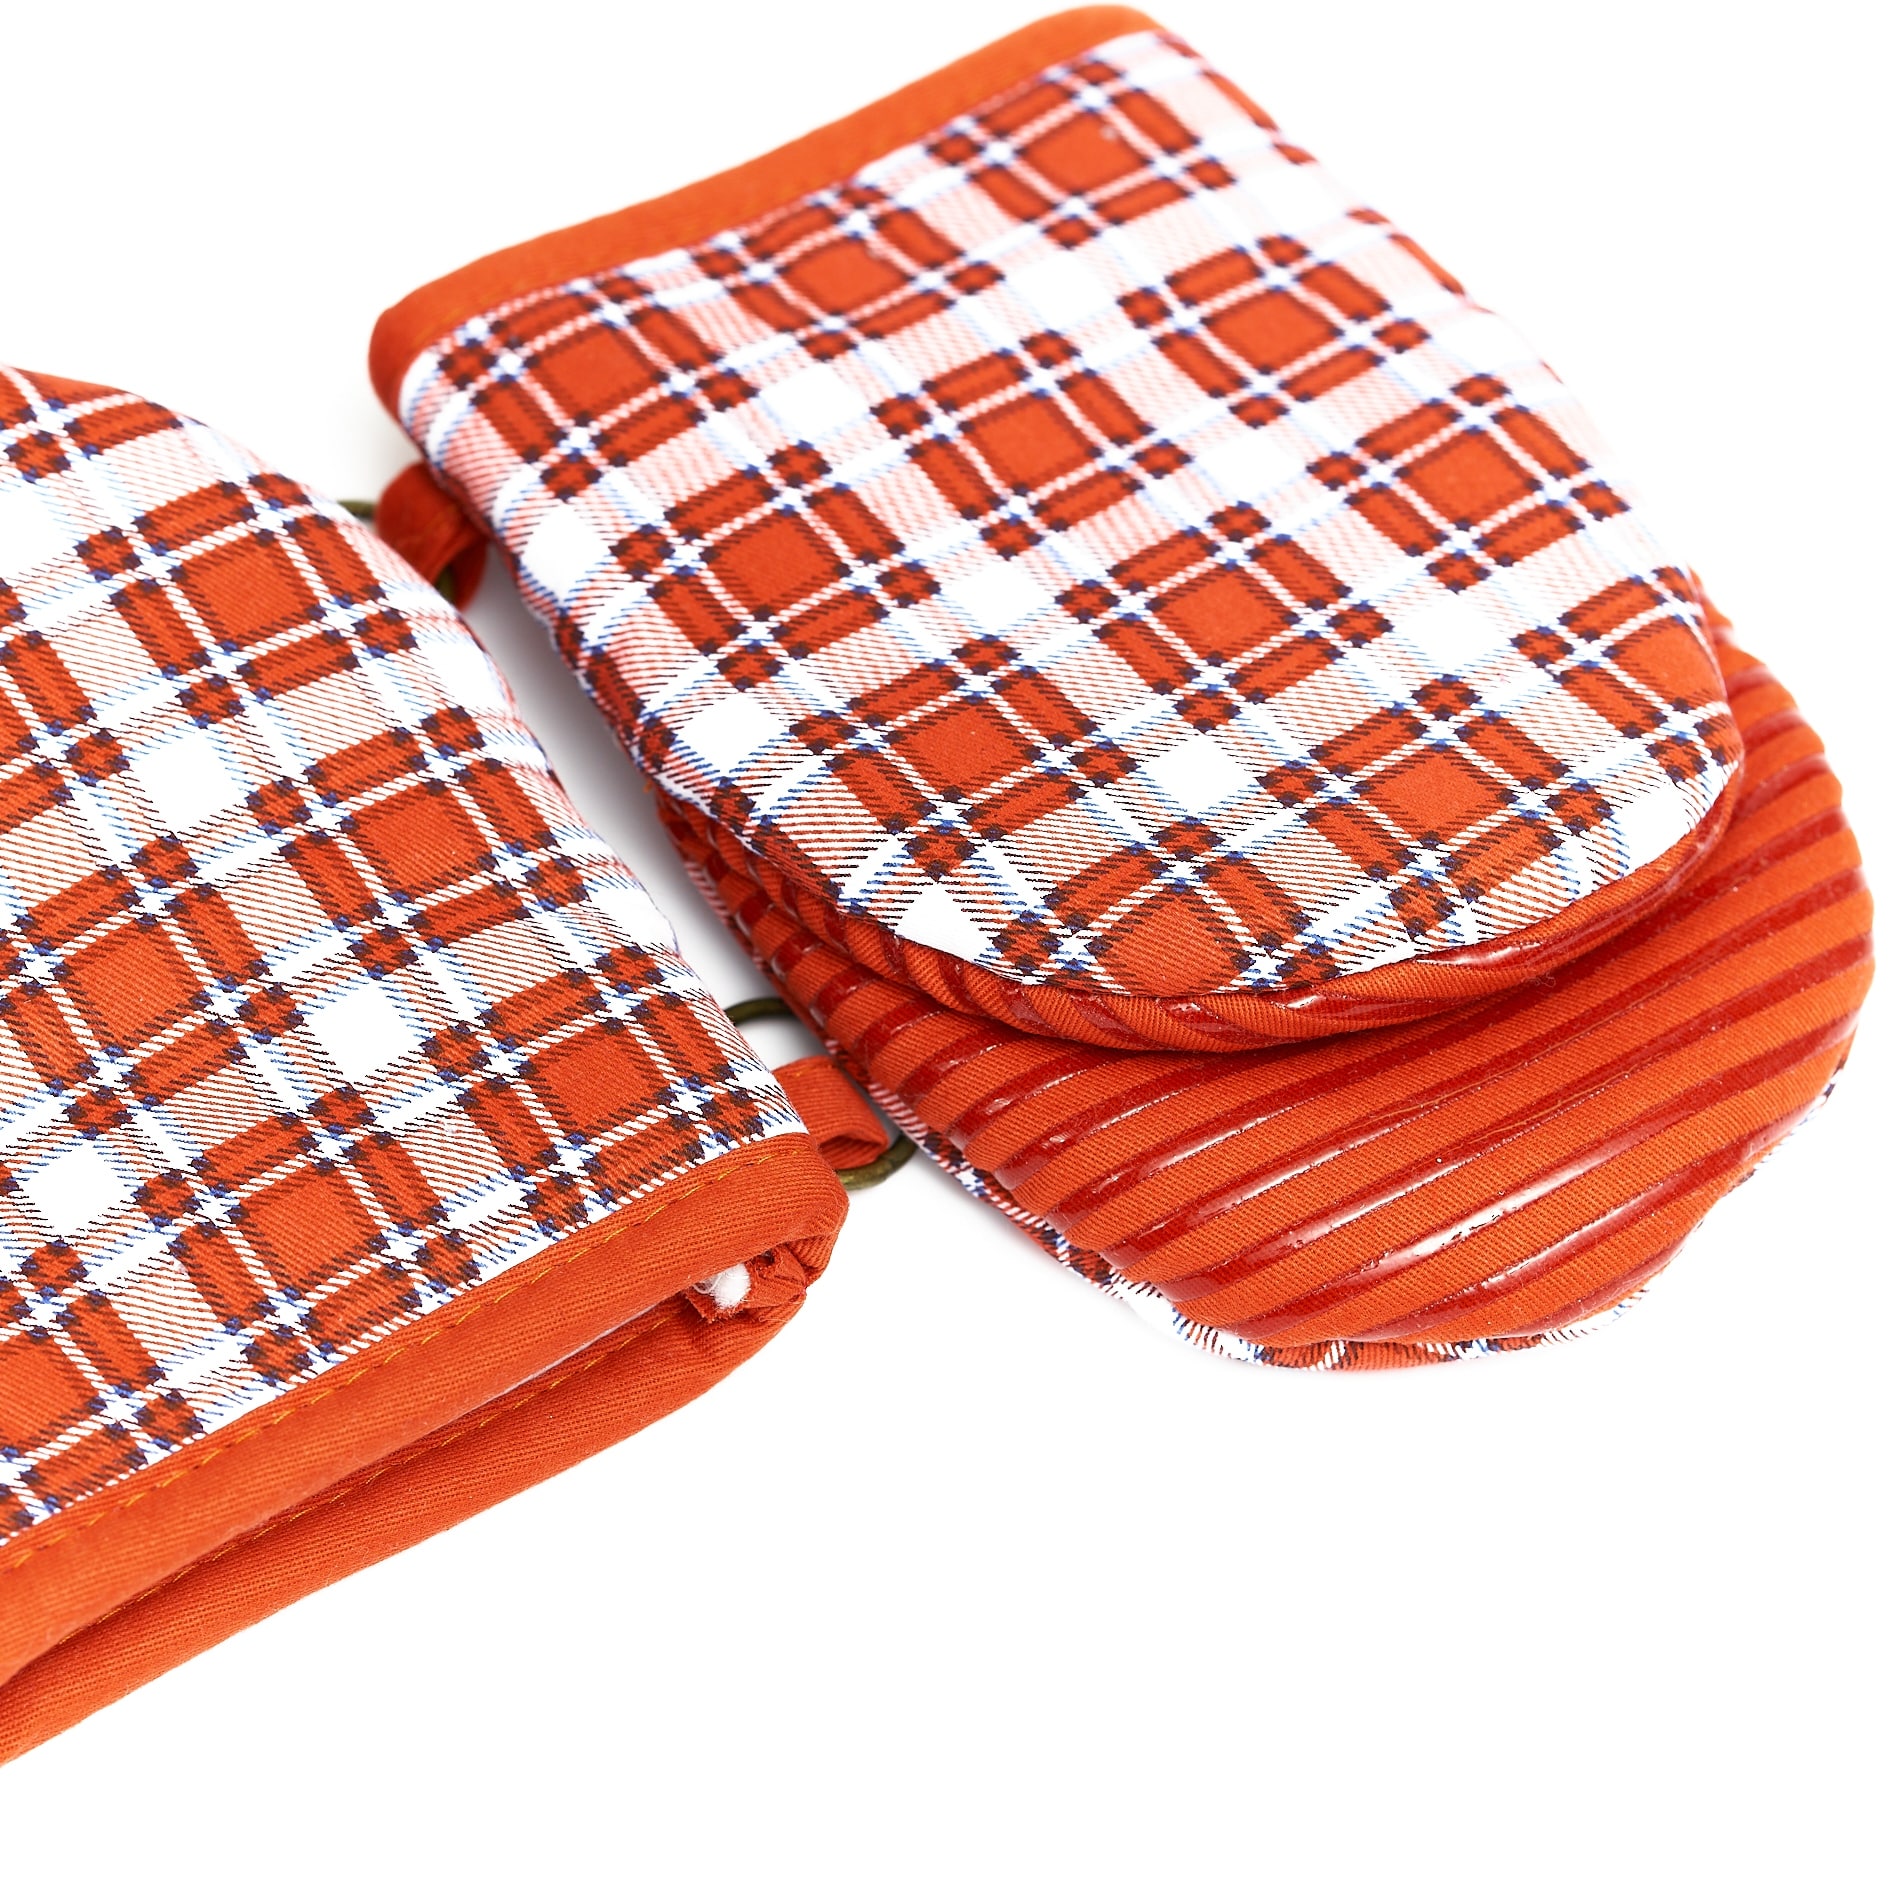 https://ak1.ostkcdn.com/images/products/is/images/direct/0021d08cfb3817f0336d1513c2423d4845d7fa9d/Nautica-Home-Red-Plaid-100%25-Cotton-Mini-Oven-Mitt-With-Silicone-Palm-%28Set-of-2%29.jpg